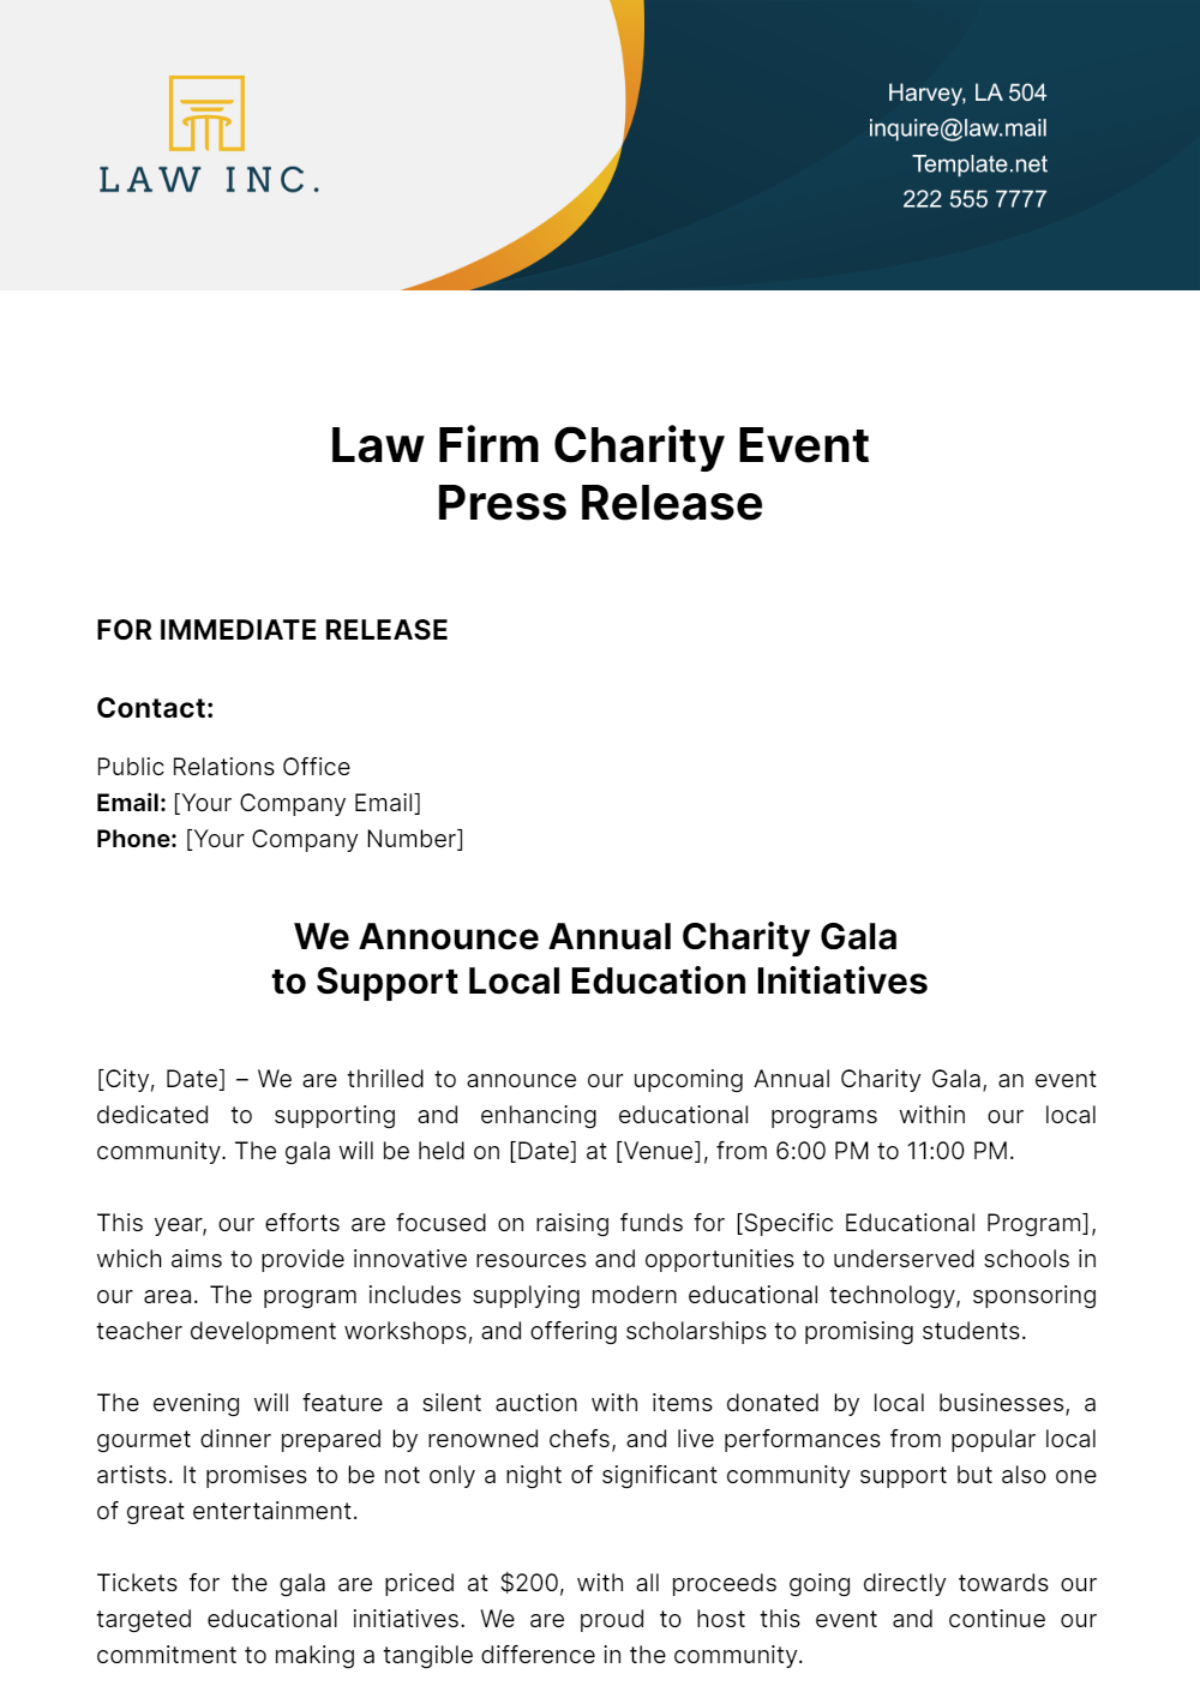 Free Law Firm Charity Event Press Release Template